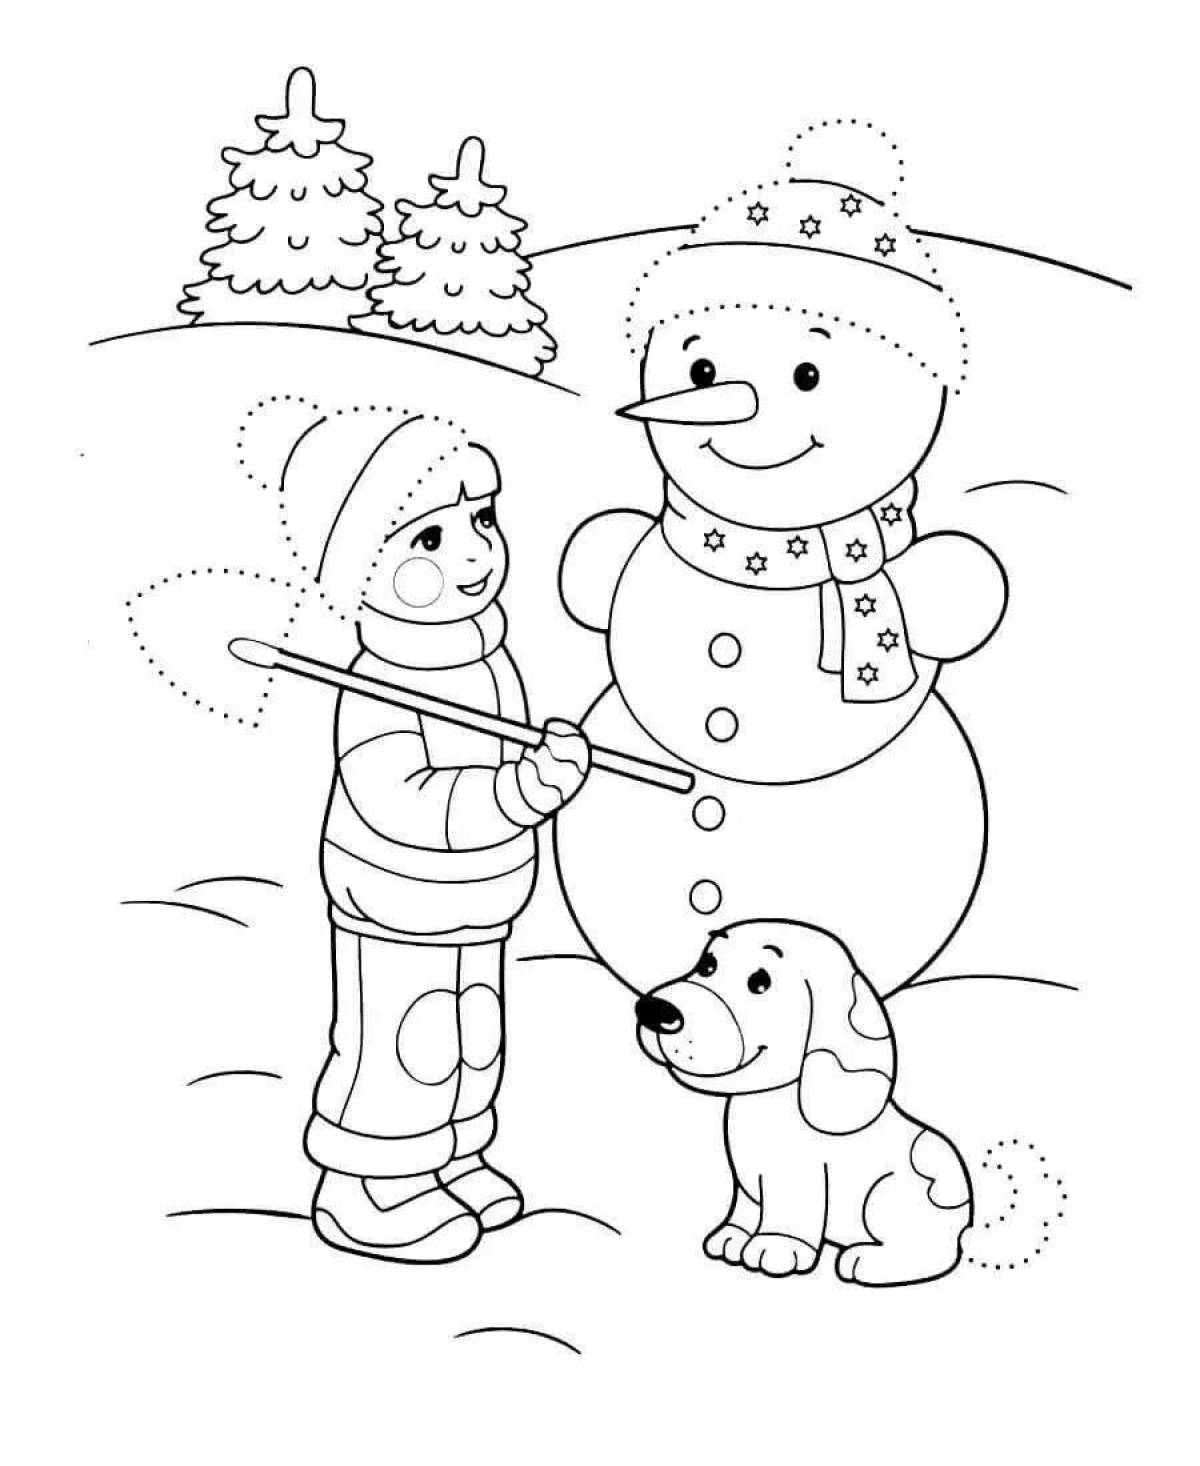 Winter fun junior group coloring page